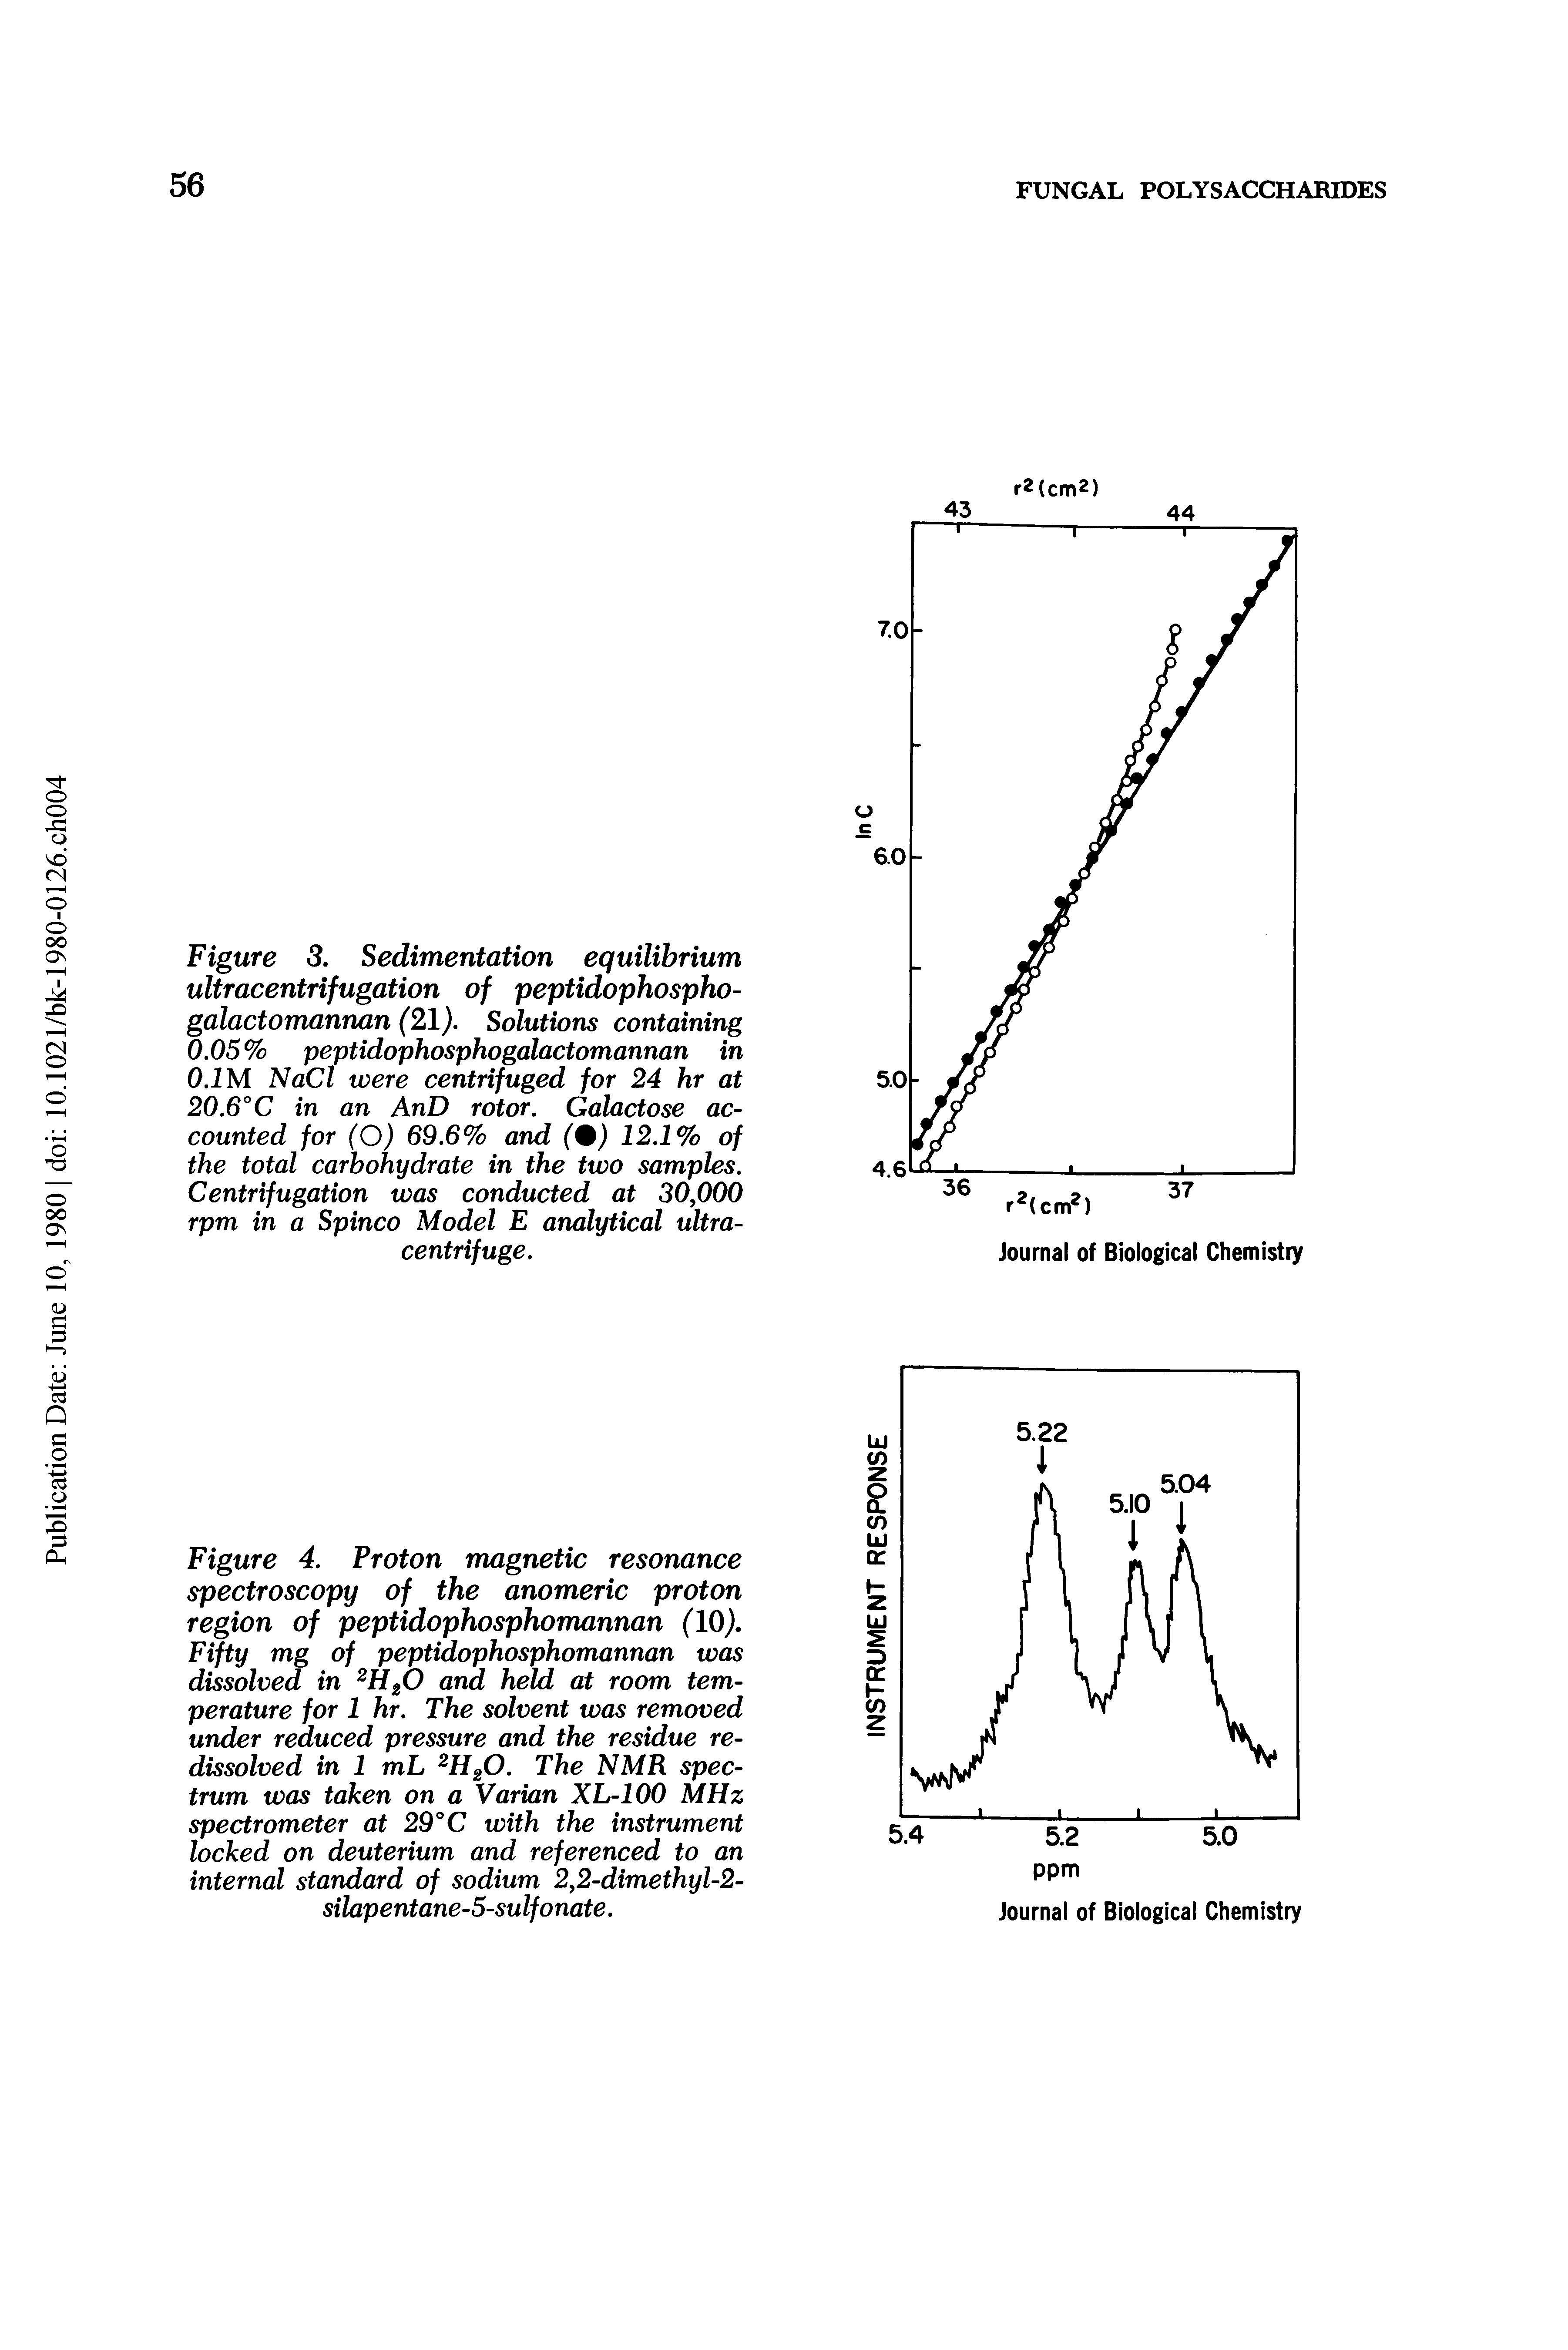 Figure 4. Proton magnetic resonance spectroscopy of the anomeric proton region of peptidophosphomannan (10). Fifty mg of peptidophosphomannan was dissolved in H20 and held at room temperature for 1 hr. The solvent was removed under reduced pressure and the residue redissolved in 1 mL H20. The NMR spectrum was taken on a Varian XL-100 MHz spectrometer at 29°C with the instrument locked on deuterium and referenced to an internal standard of sodium 2,2-dimethyl-2-silapentane-5-sulfonate.